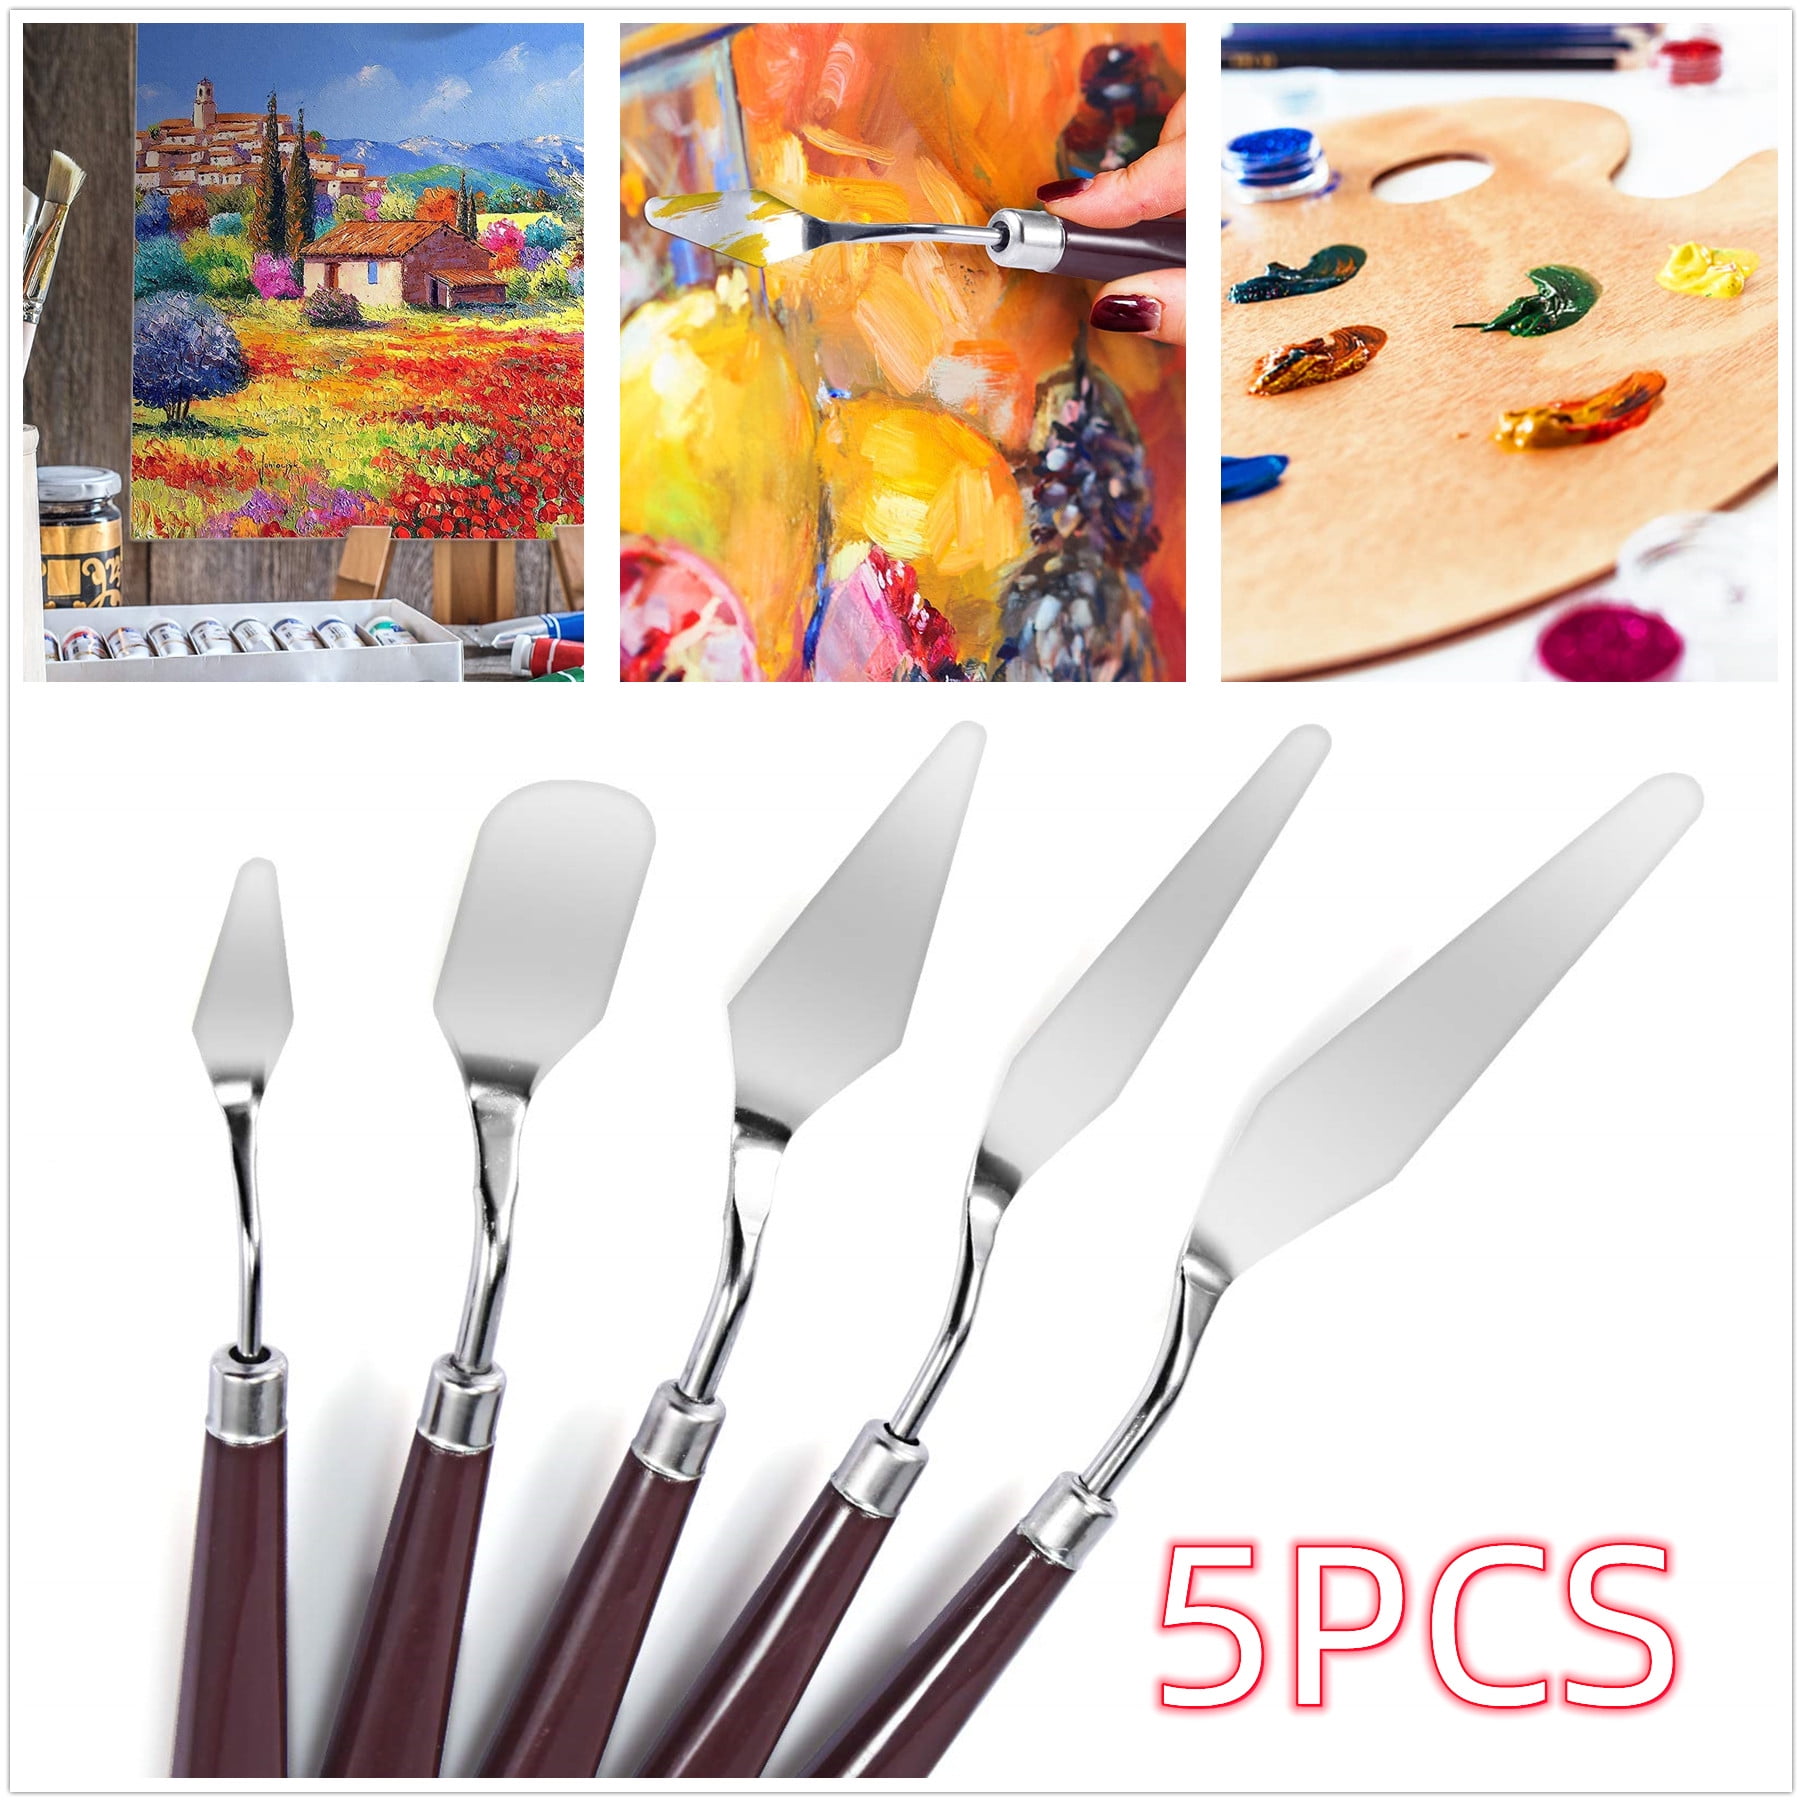 5 Pieces Painting Knives Stainless Steel Palette Knife Set, Paint